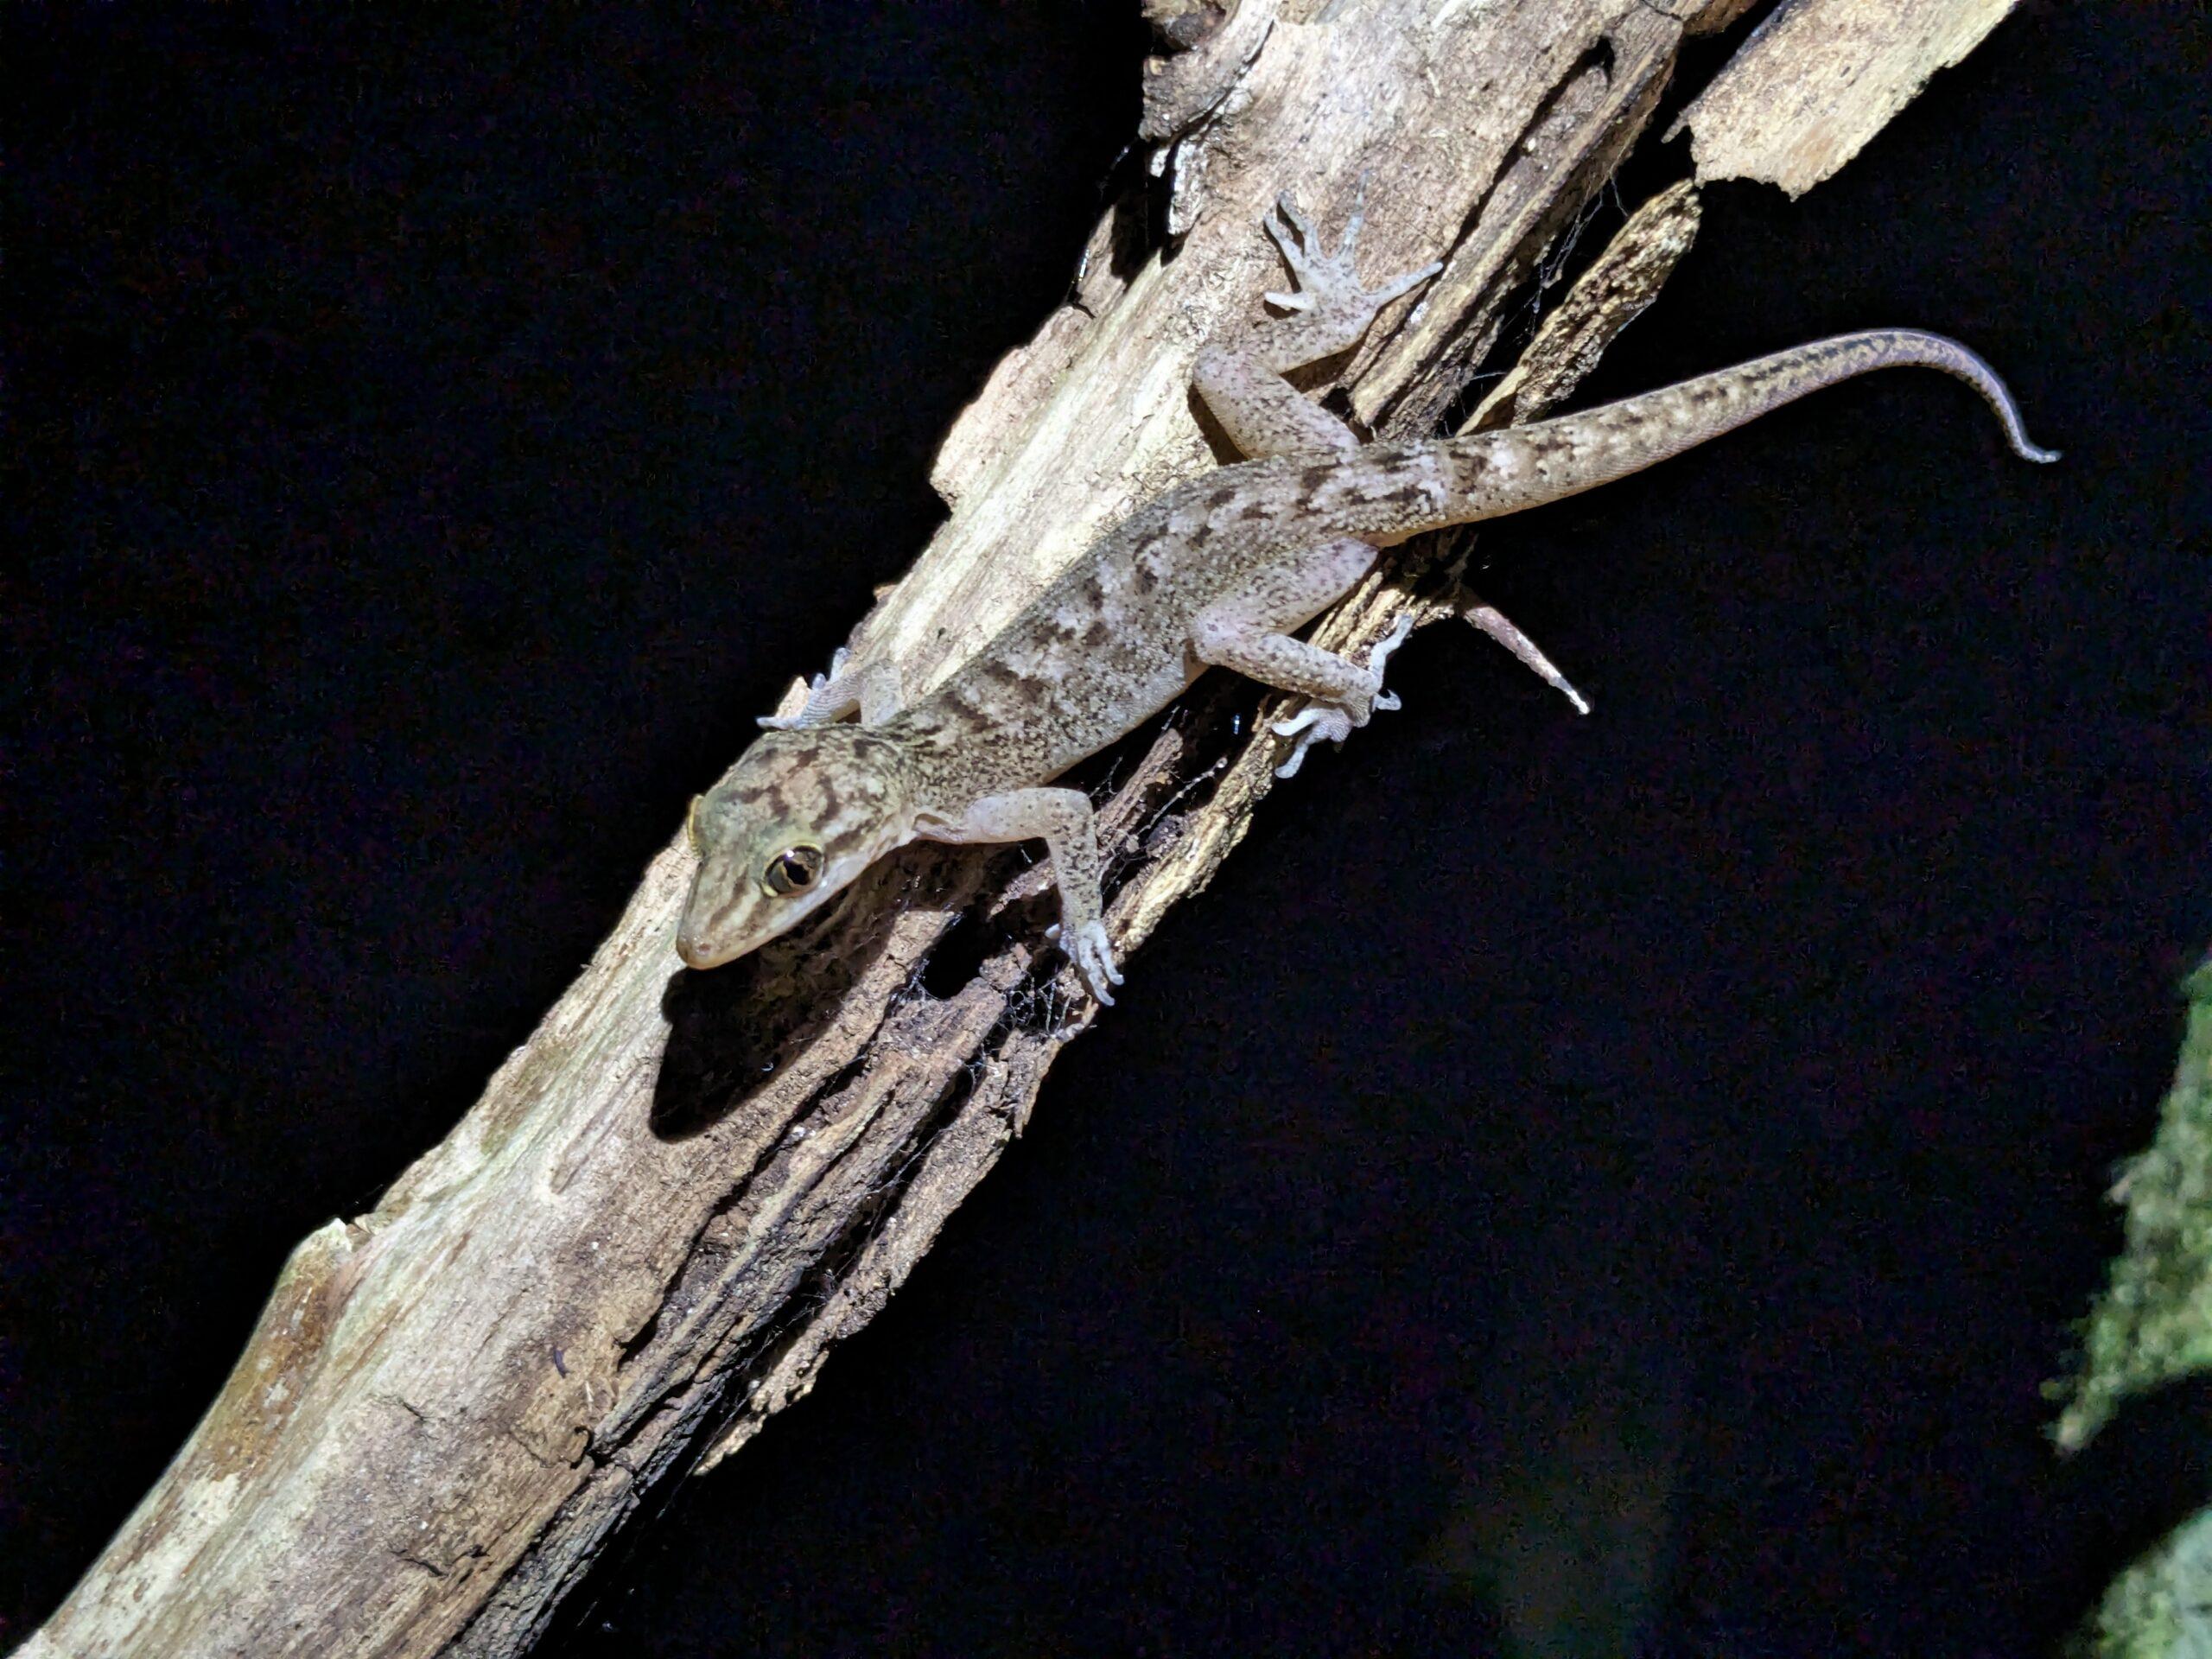 A small grey lizard on a branch